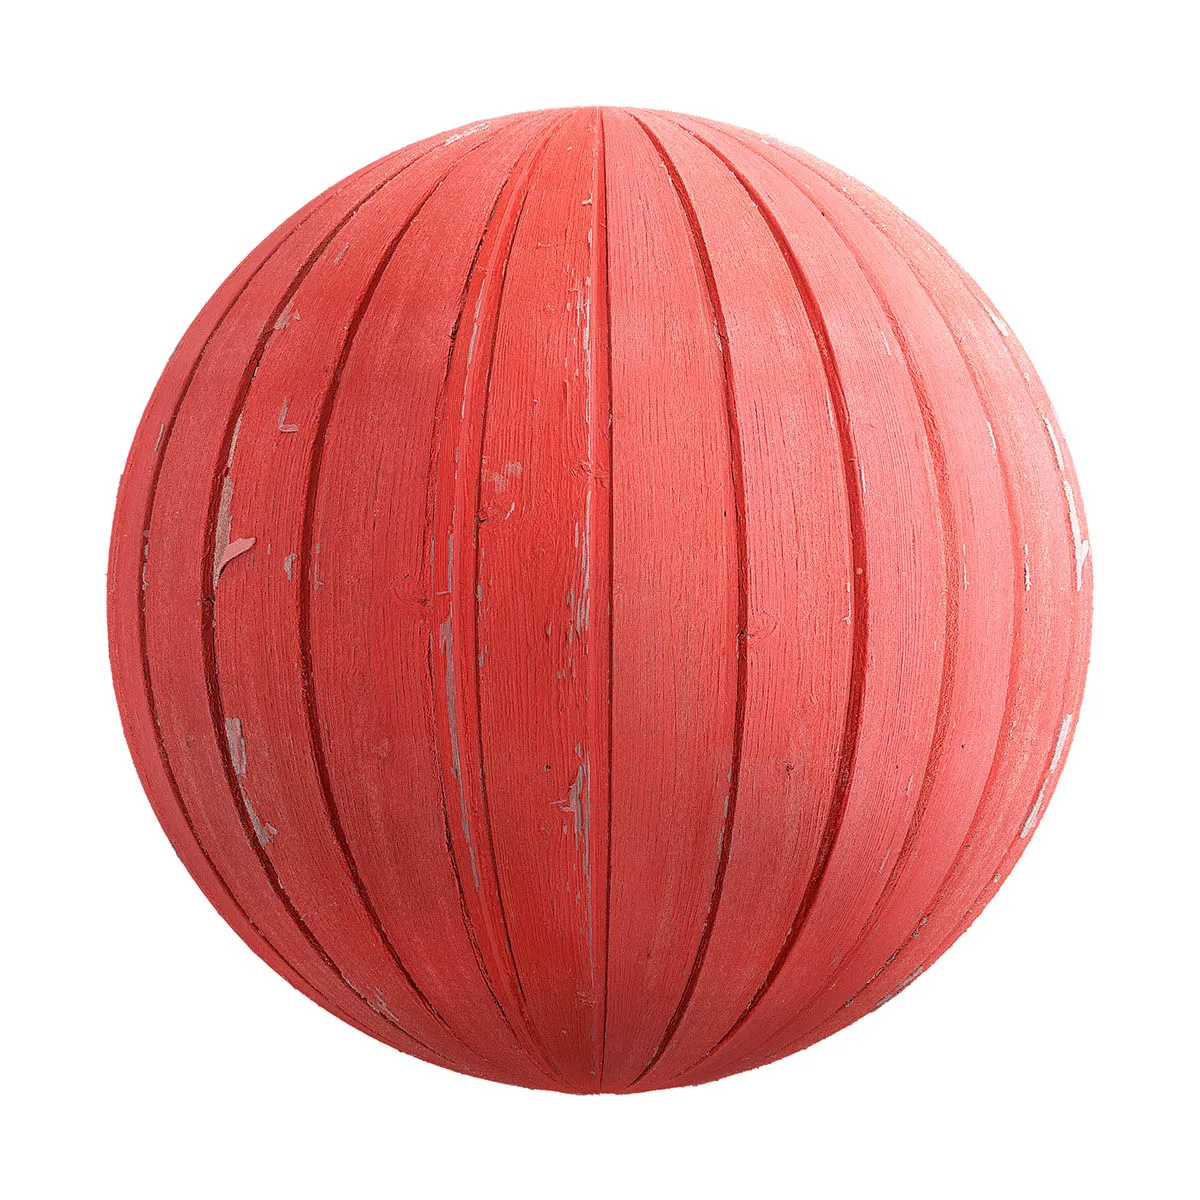 CGAxis PRB 18 – Red Painted Wooden Planks Pbr 73 – 4K – 8K